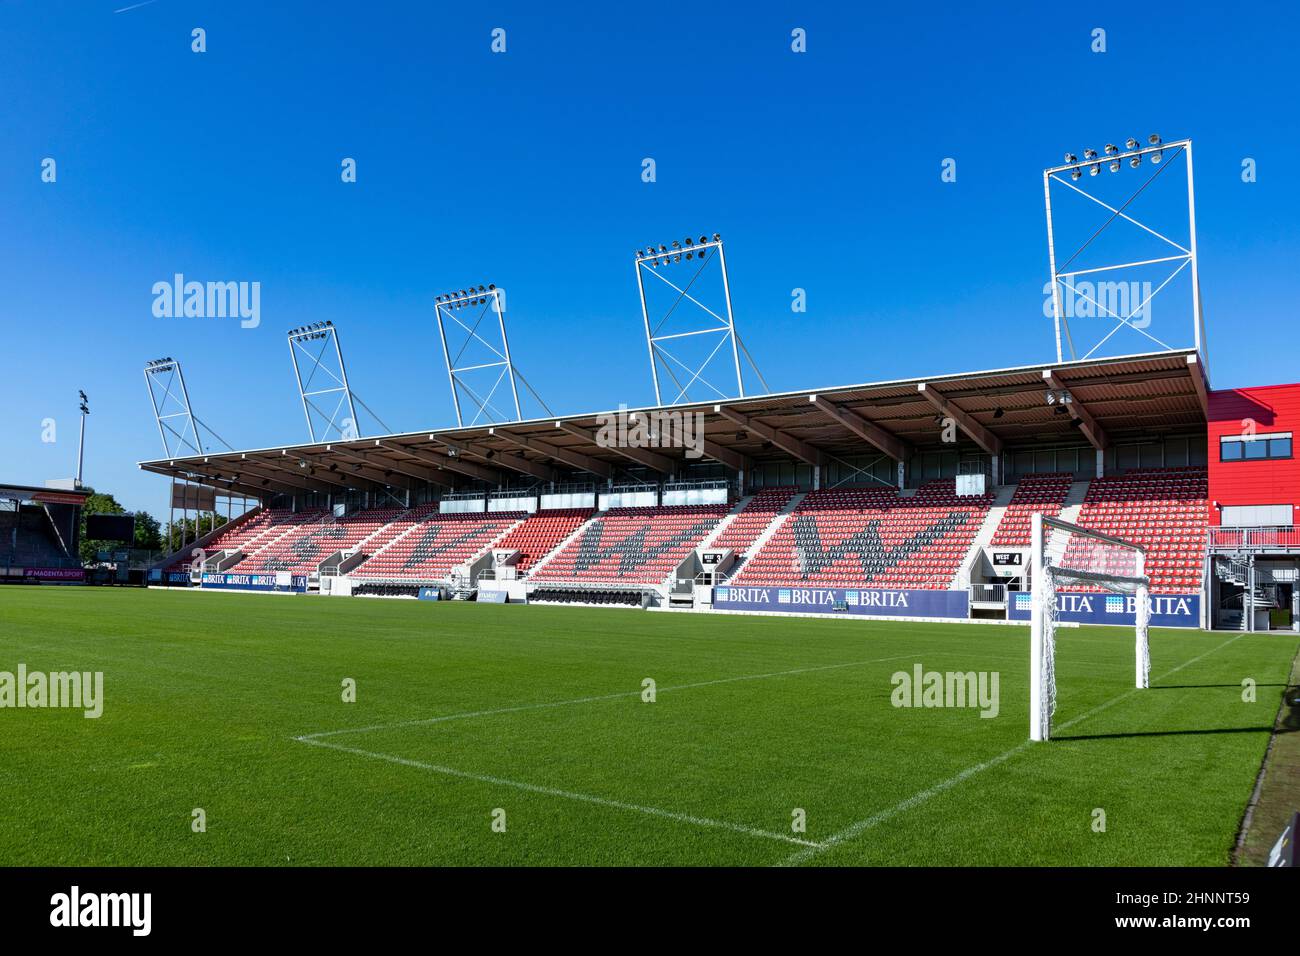 The Brita arena is the home statium for the soccer team SV Wehen  Wiesbaden,playing in the professional league in Germany Stock Photo - Alamy